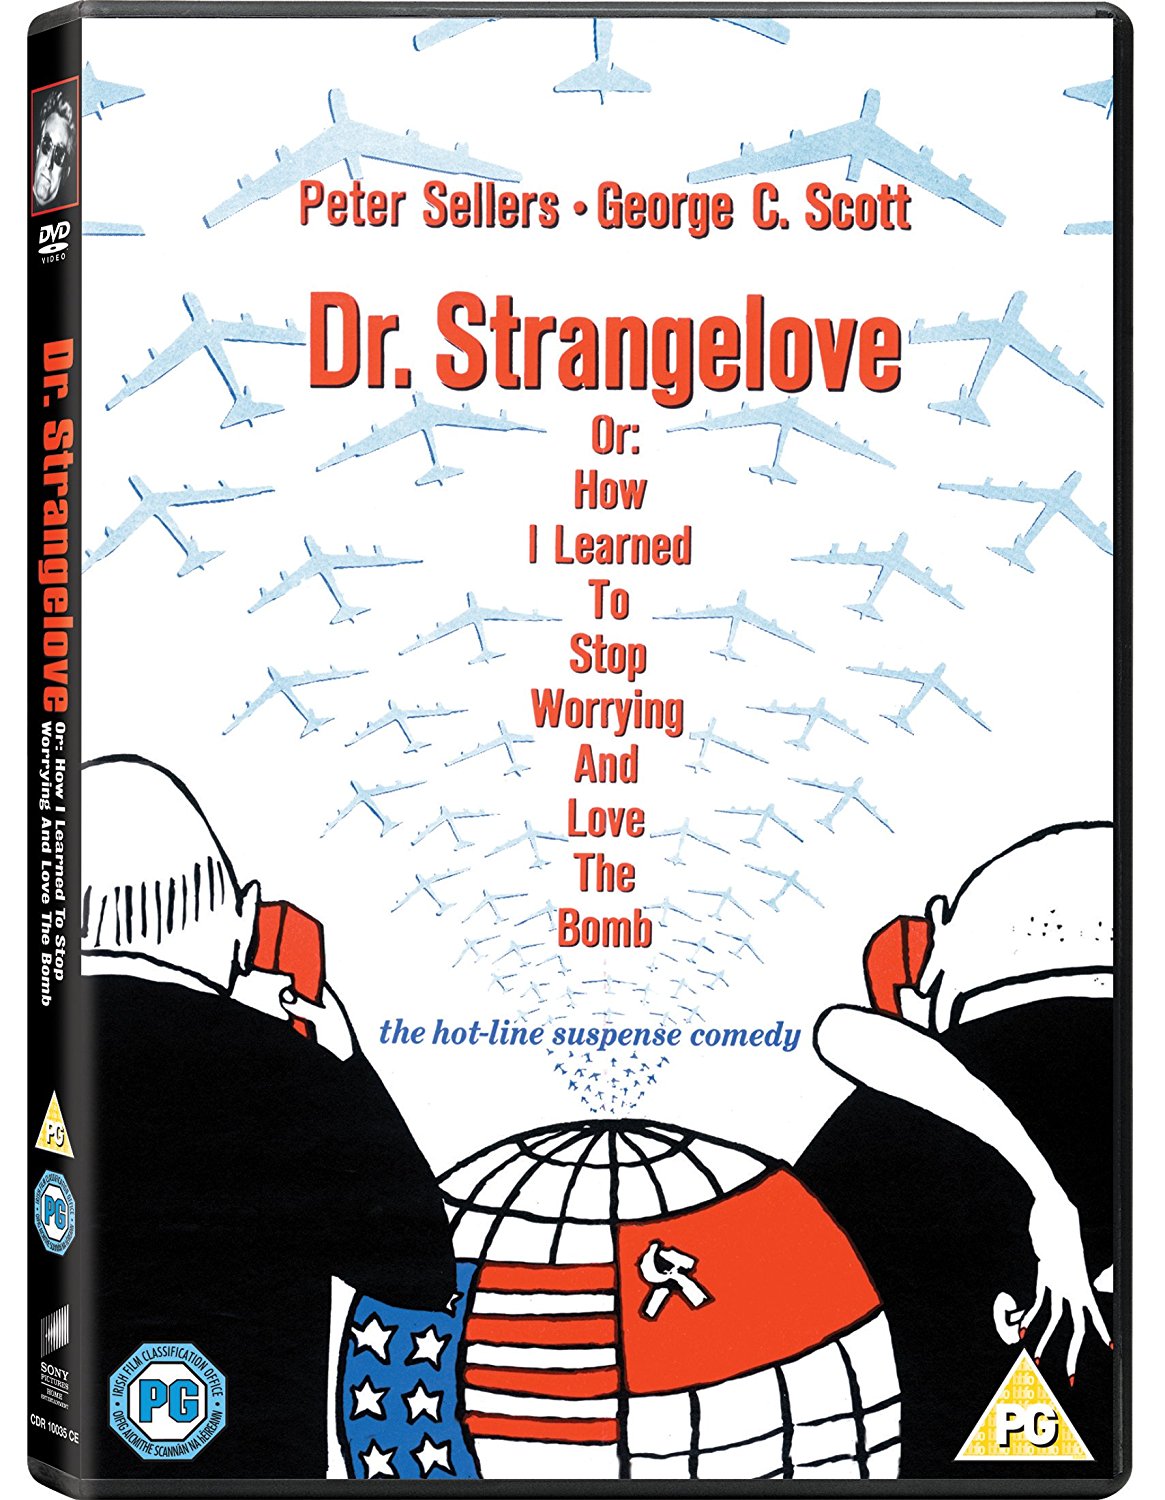 Dr. Strangelove or - How I Learned to Stop Worrying and Love the Bomb | Stanley Kubrick